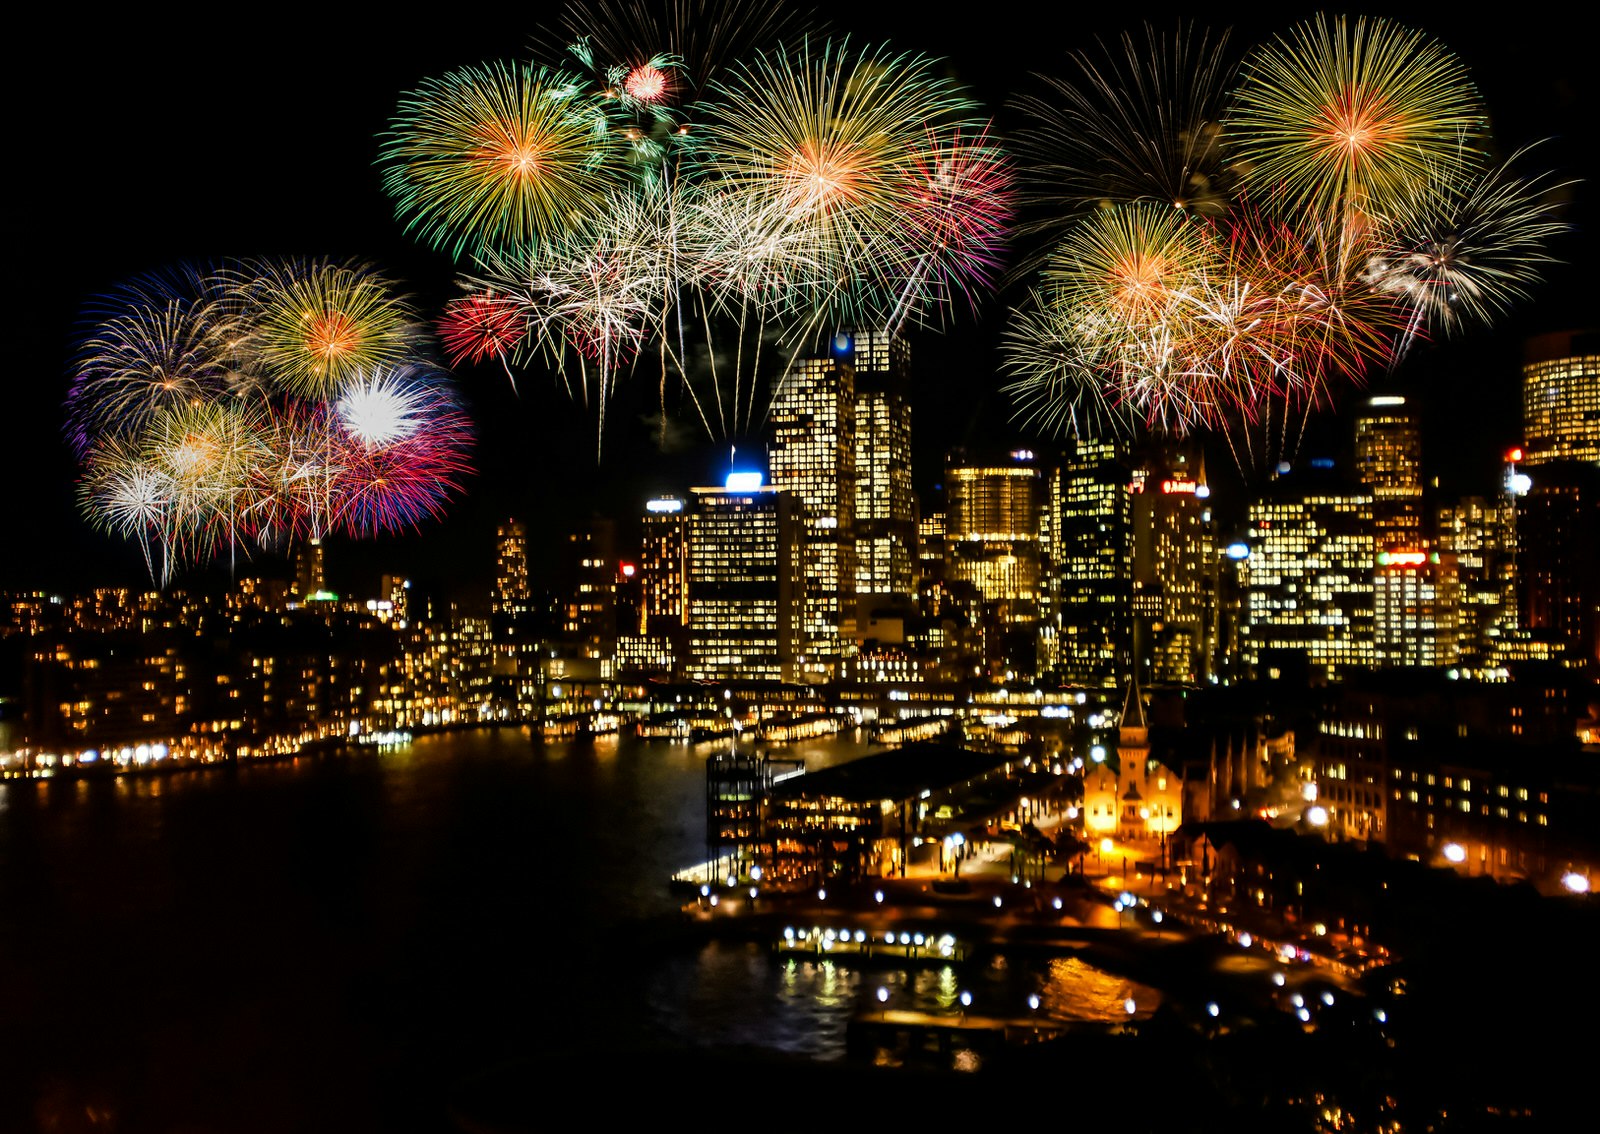 Sydney Harbour at nighttime with a colourful fireworks display happening over the water and skyscrapers